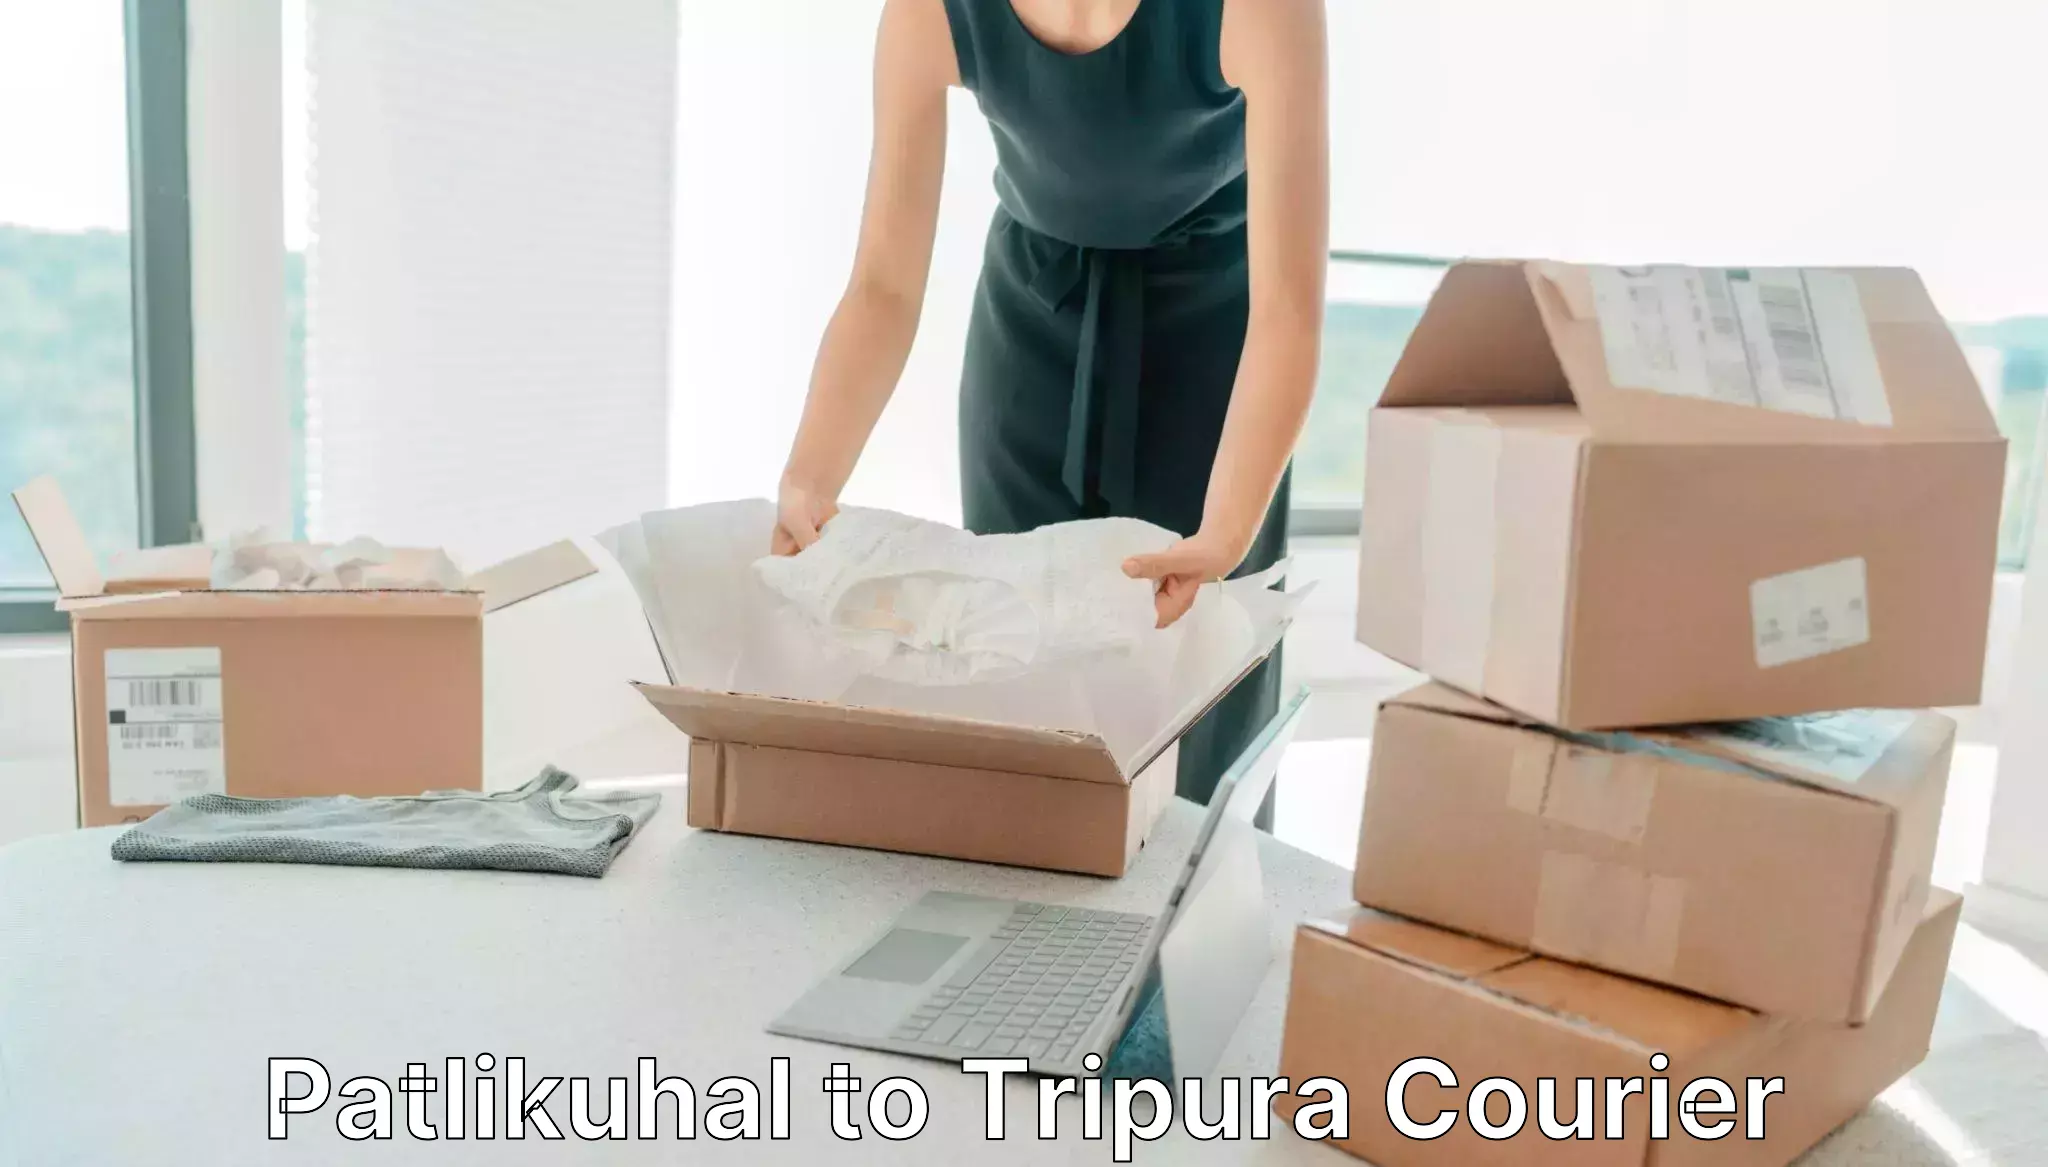 Delivery service partnership in Patlikuhal to Udaipur Tripura